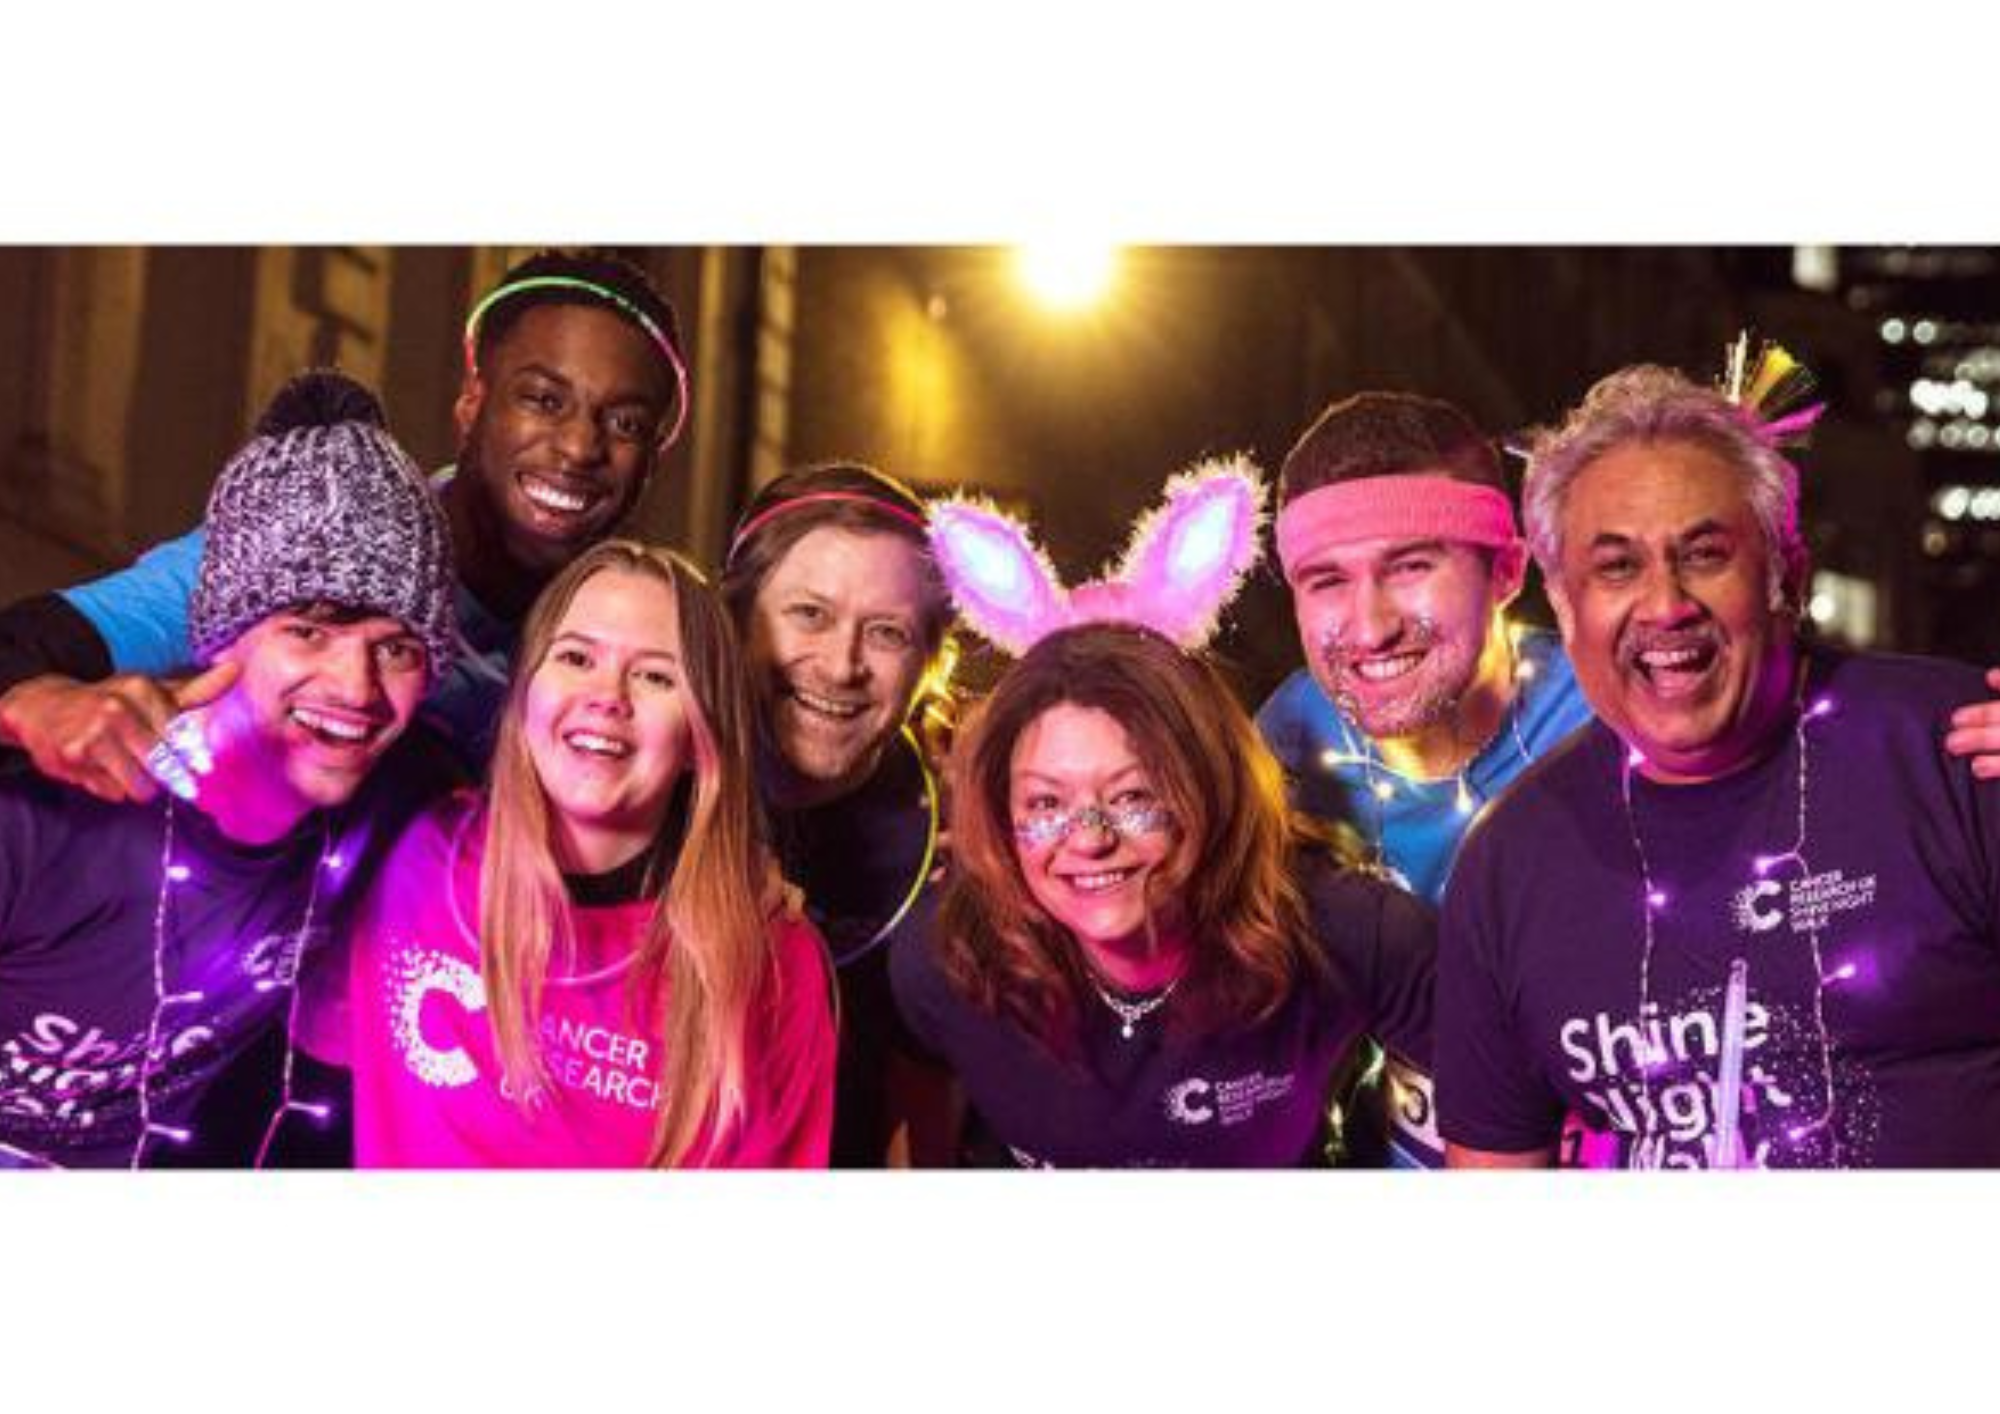 CPiO is taking part in the Cancer Research Shine Night Walk